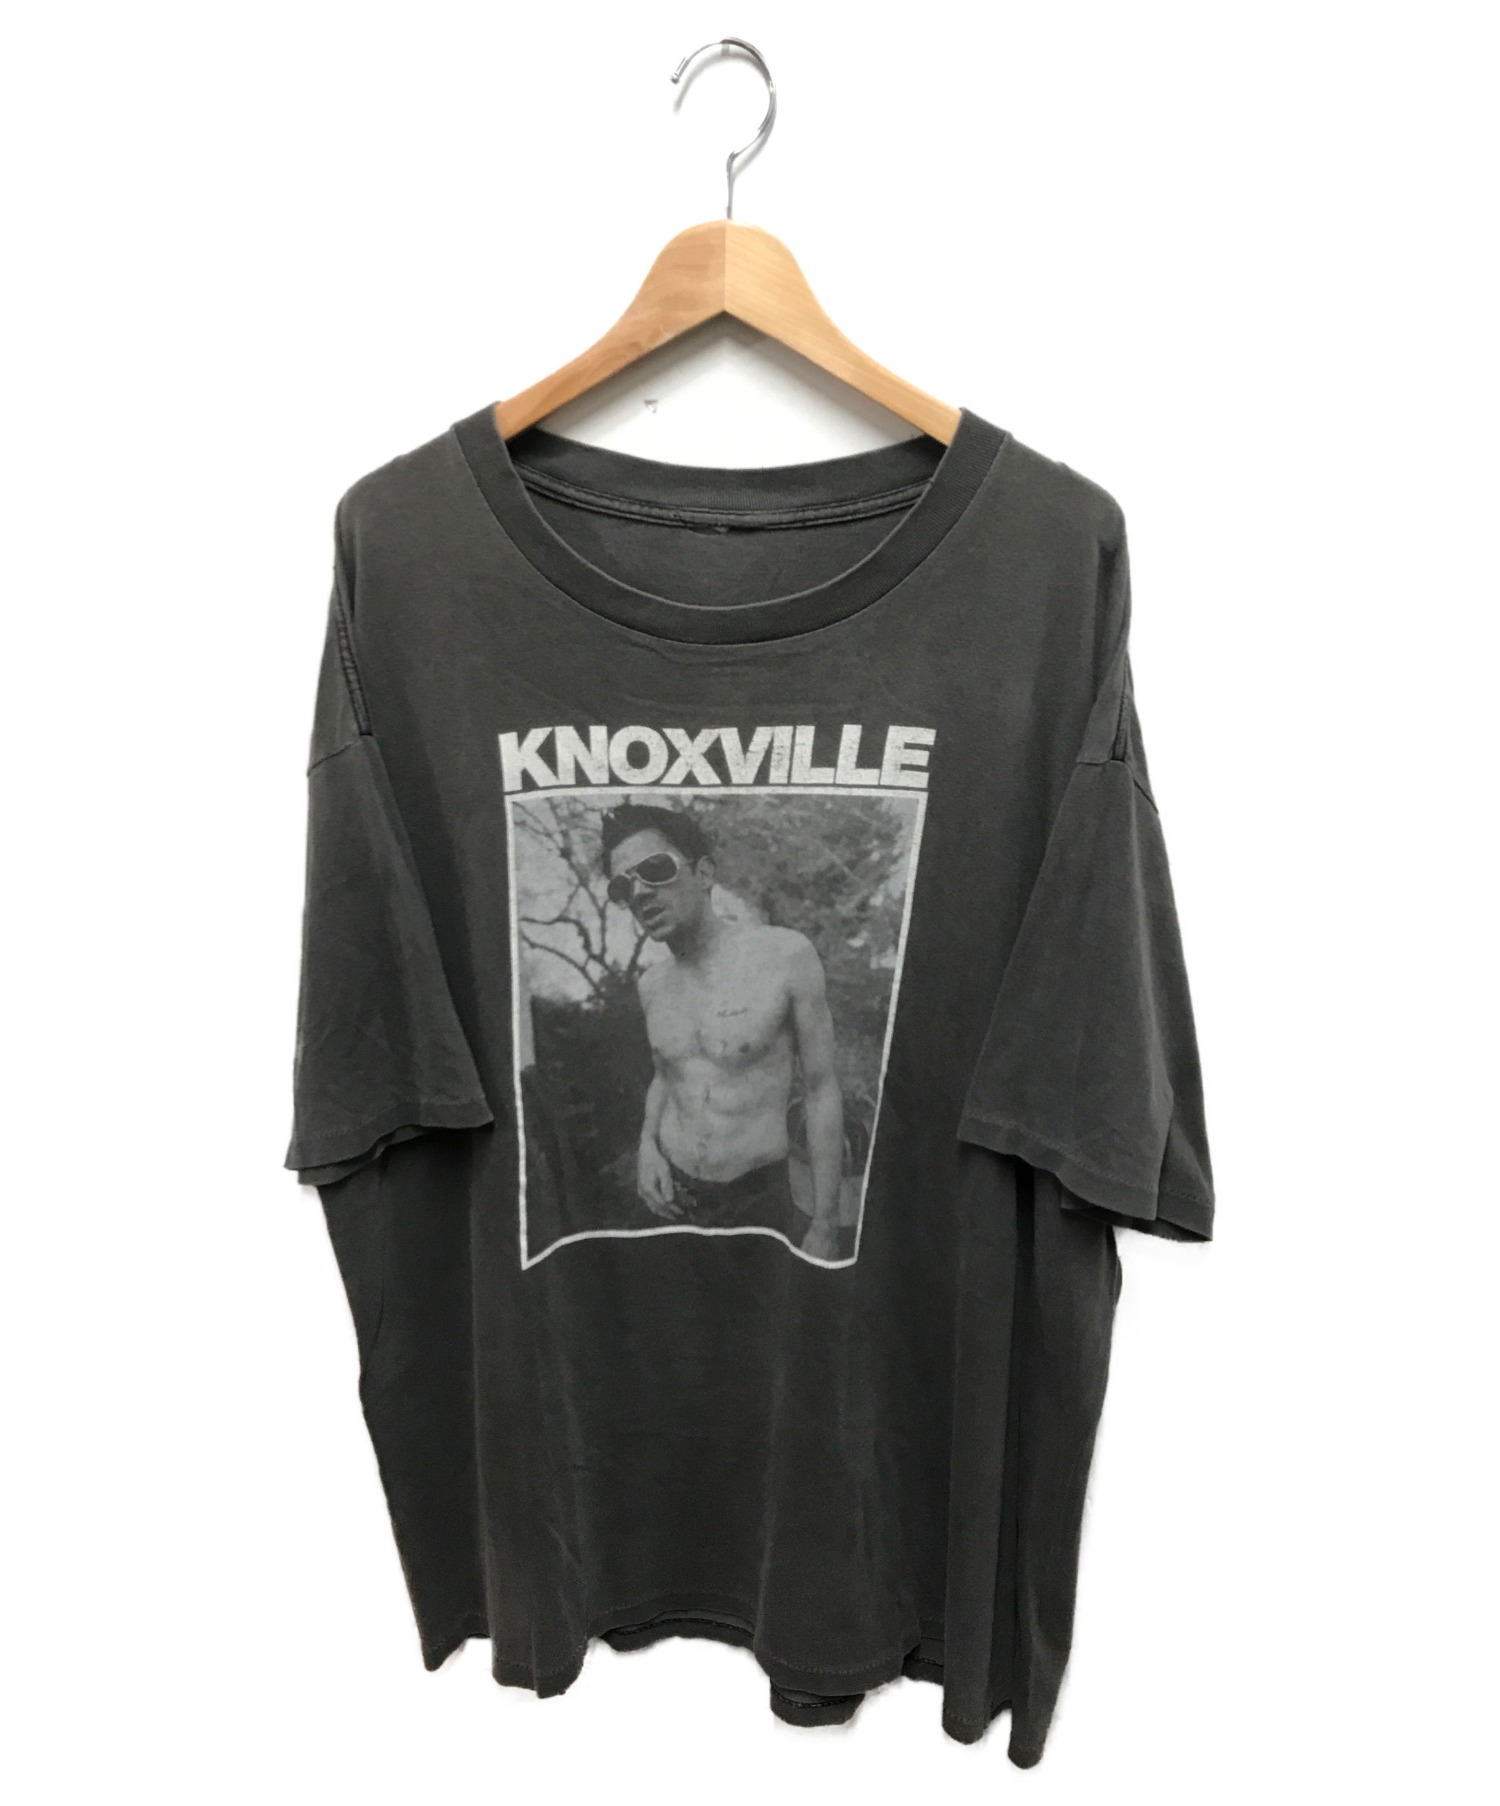 Knoxville Jackass Johnny ビンテージ tシャツ 野村-